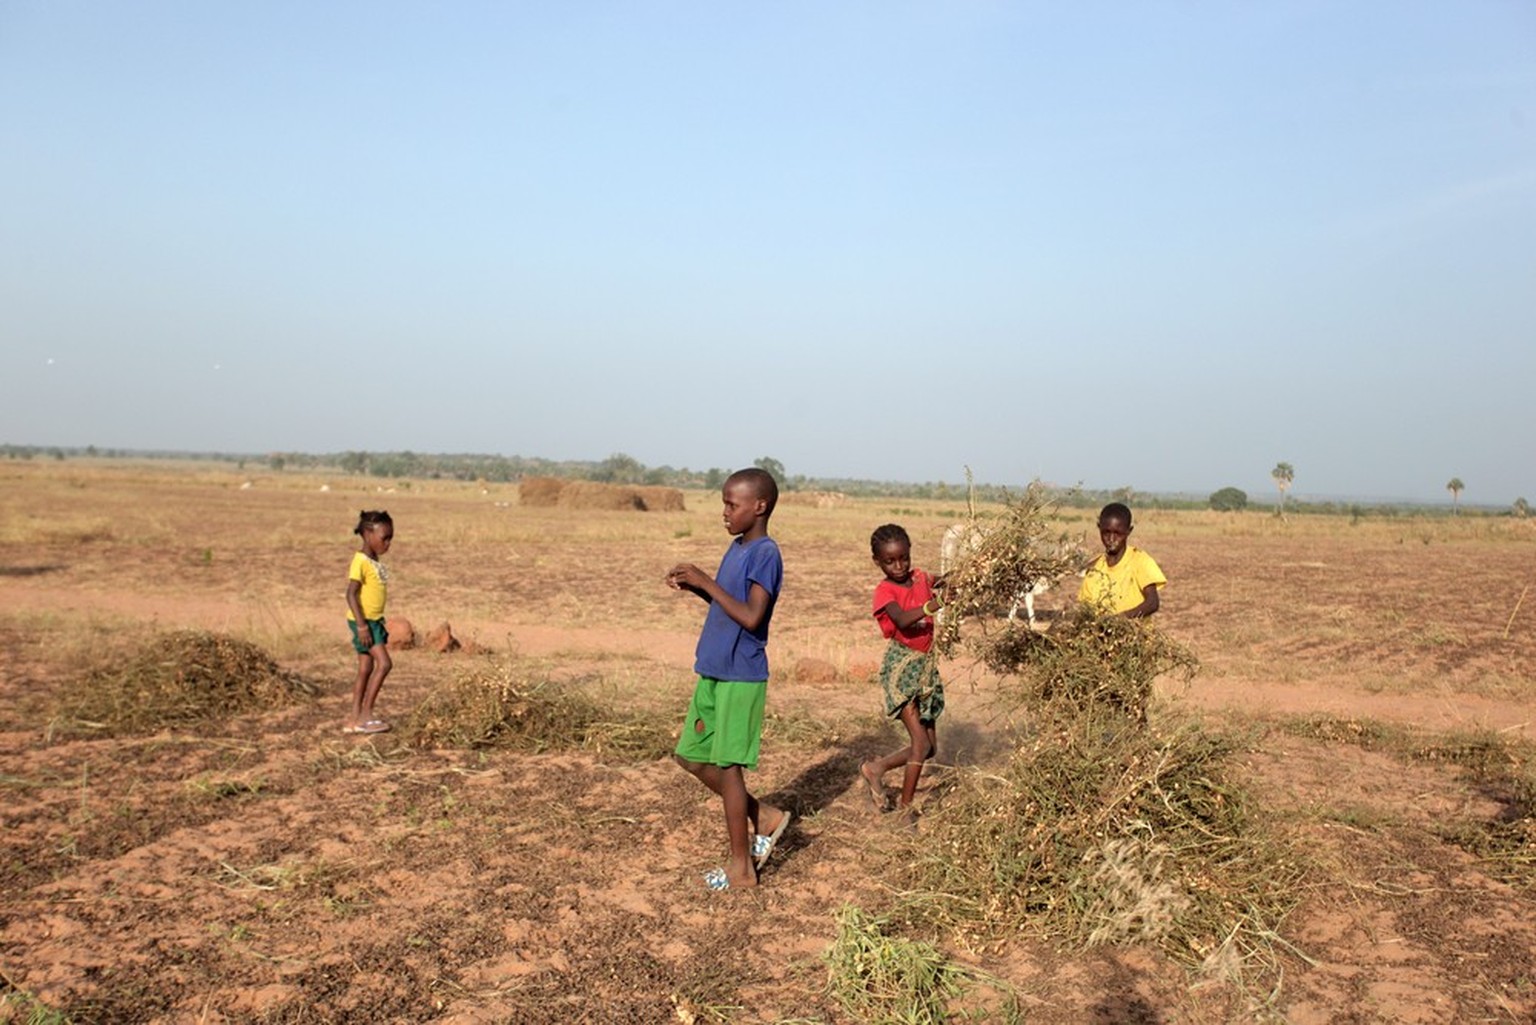 Farafeni region, the Gambia, Africa, November 11, 2019 - horizonal wide angle photography of a peanut farm,with heaps of harvested groundnut, blue sky, and a group of kids working in the field.